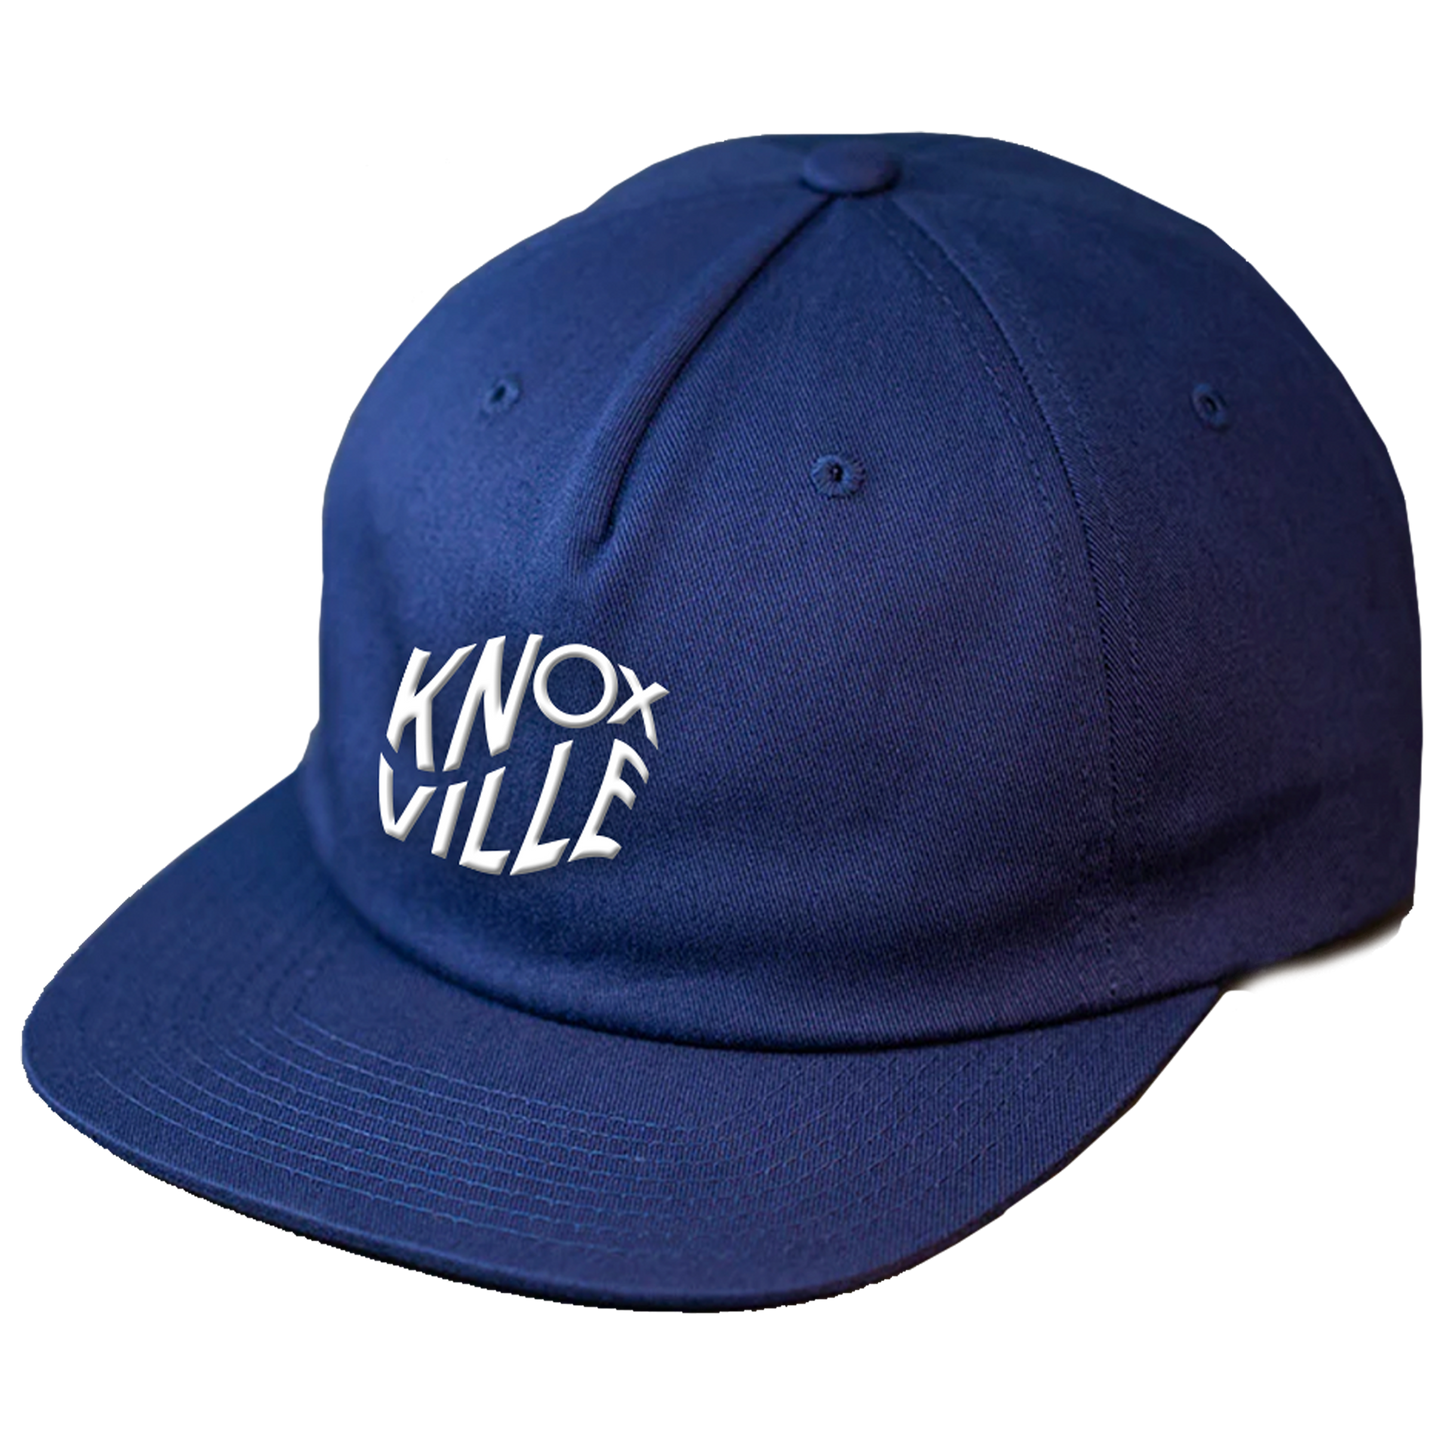 The Oliver Hotel Knoxville Embroidered Blue Hat